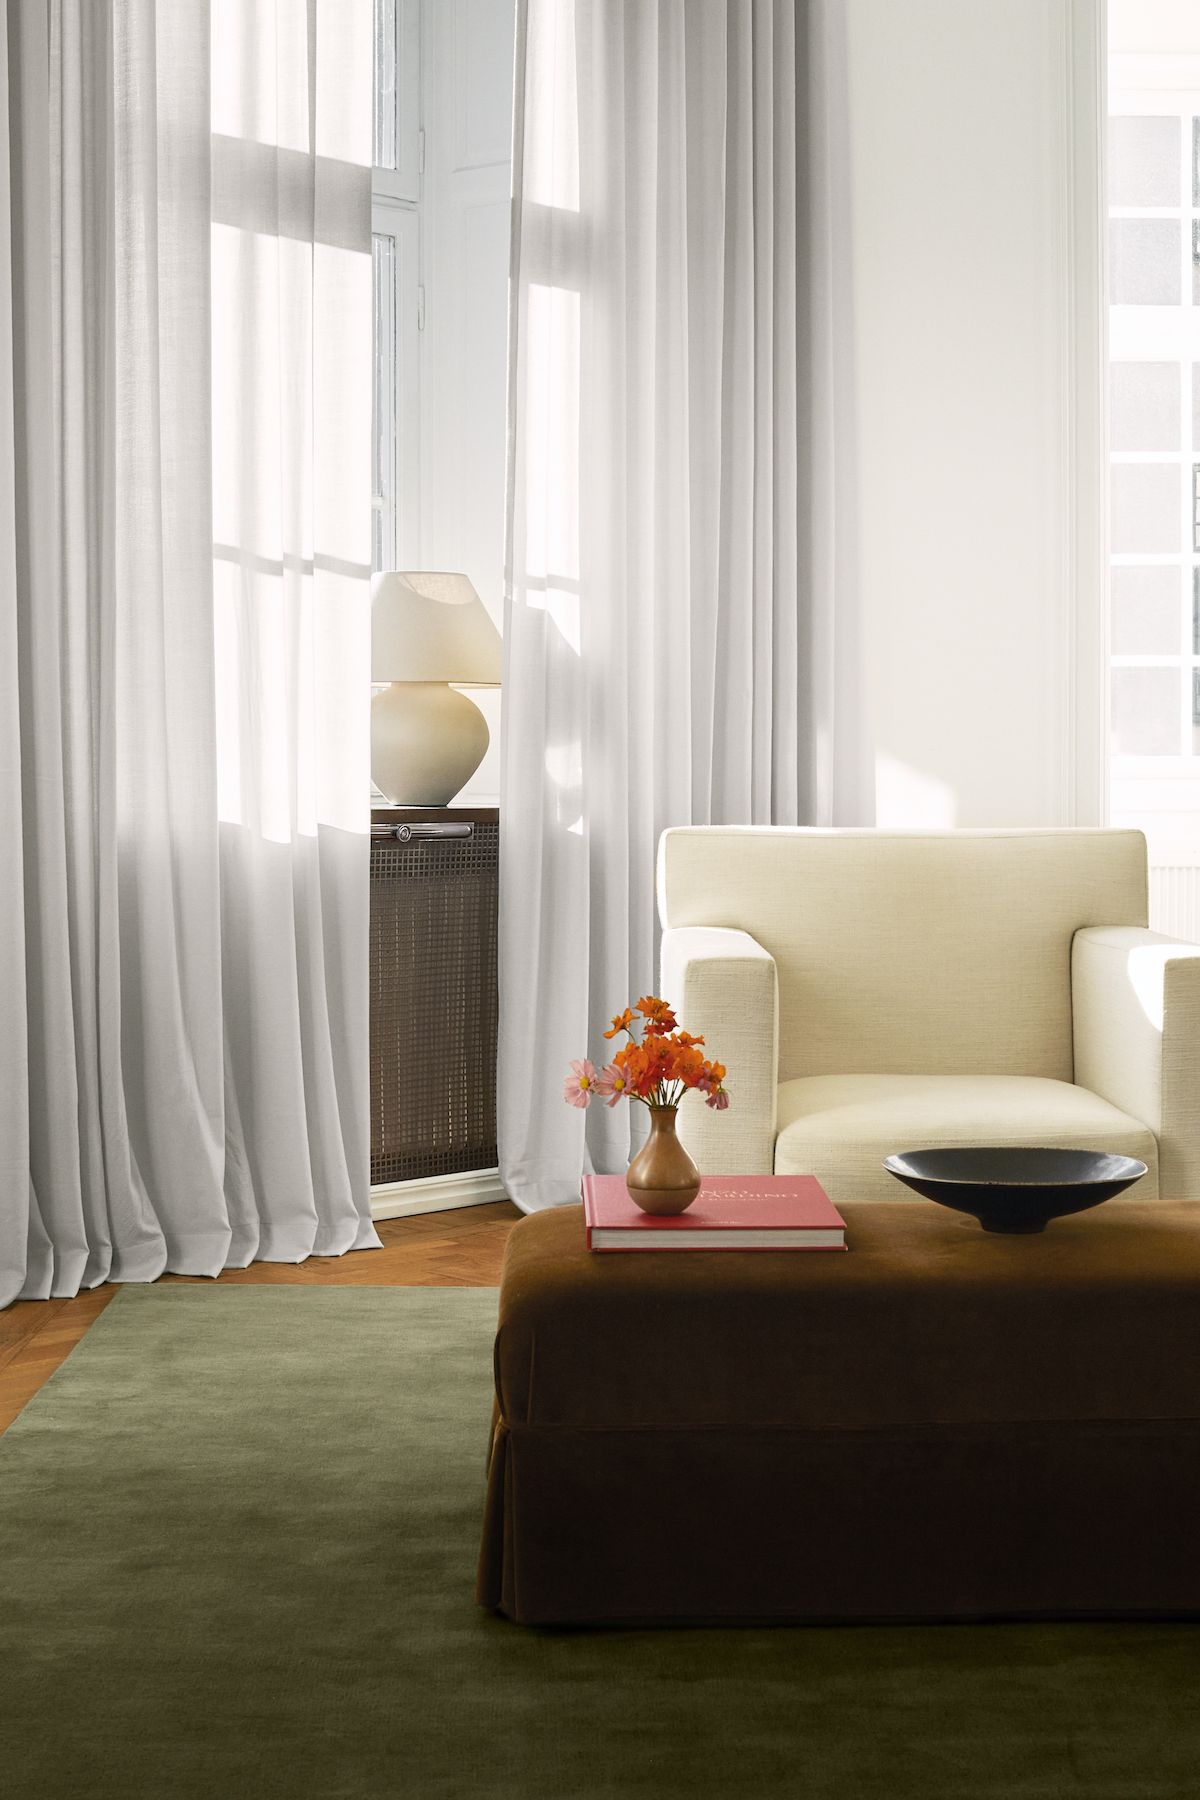 Swedish brand Nordic Knots have created curtains that keep rooms cosy while allowing soft filtered daylight to enter 